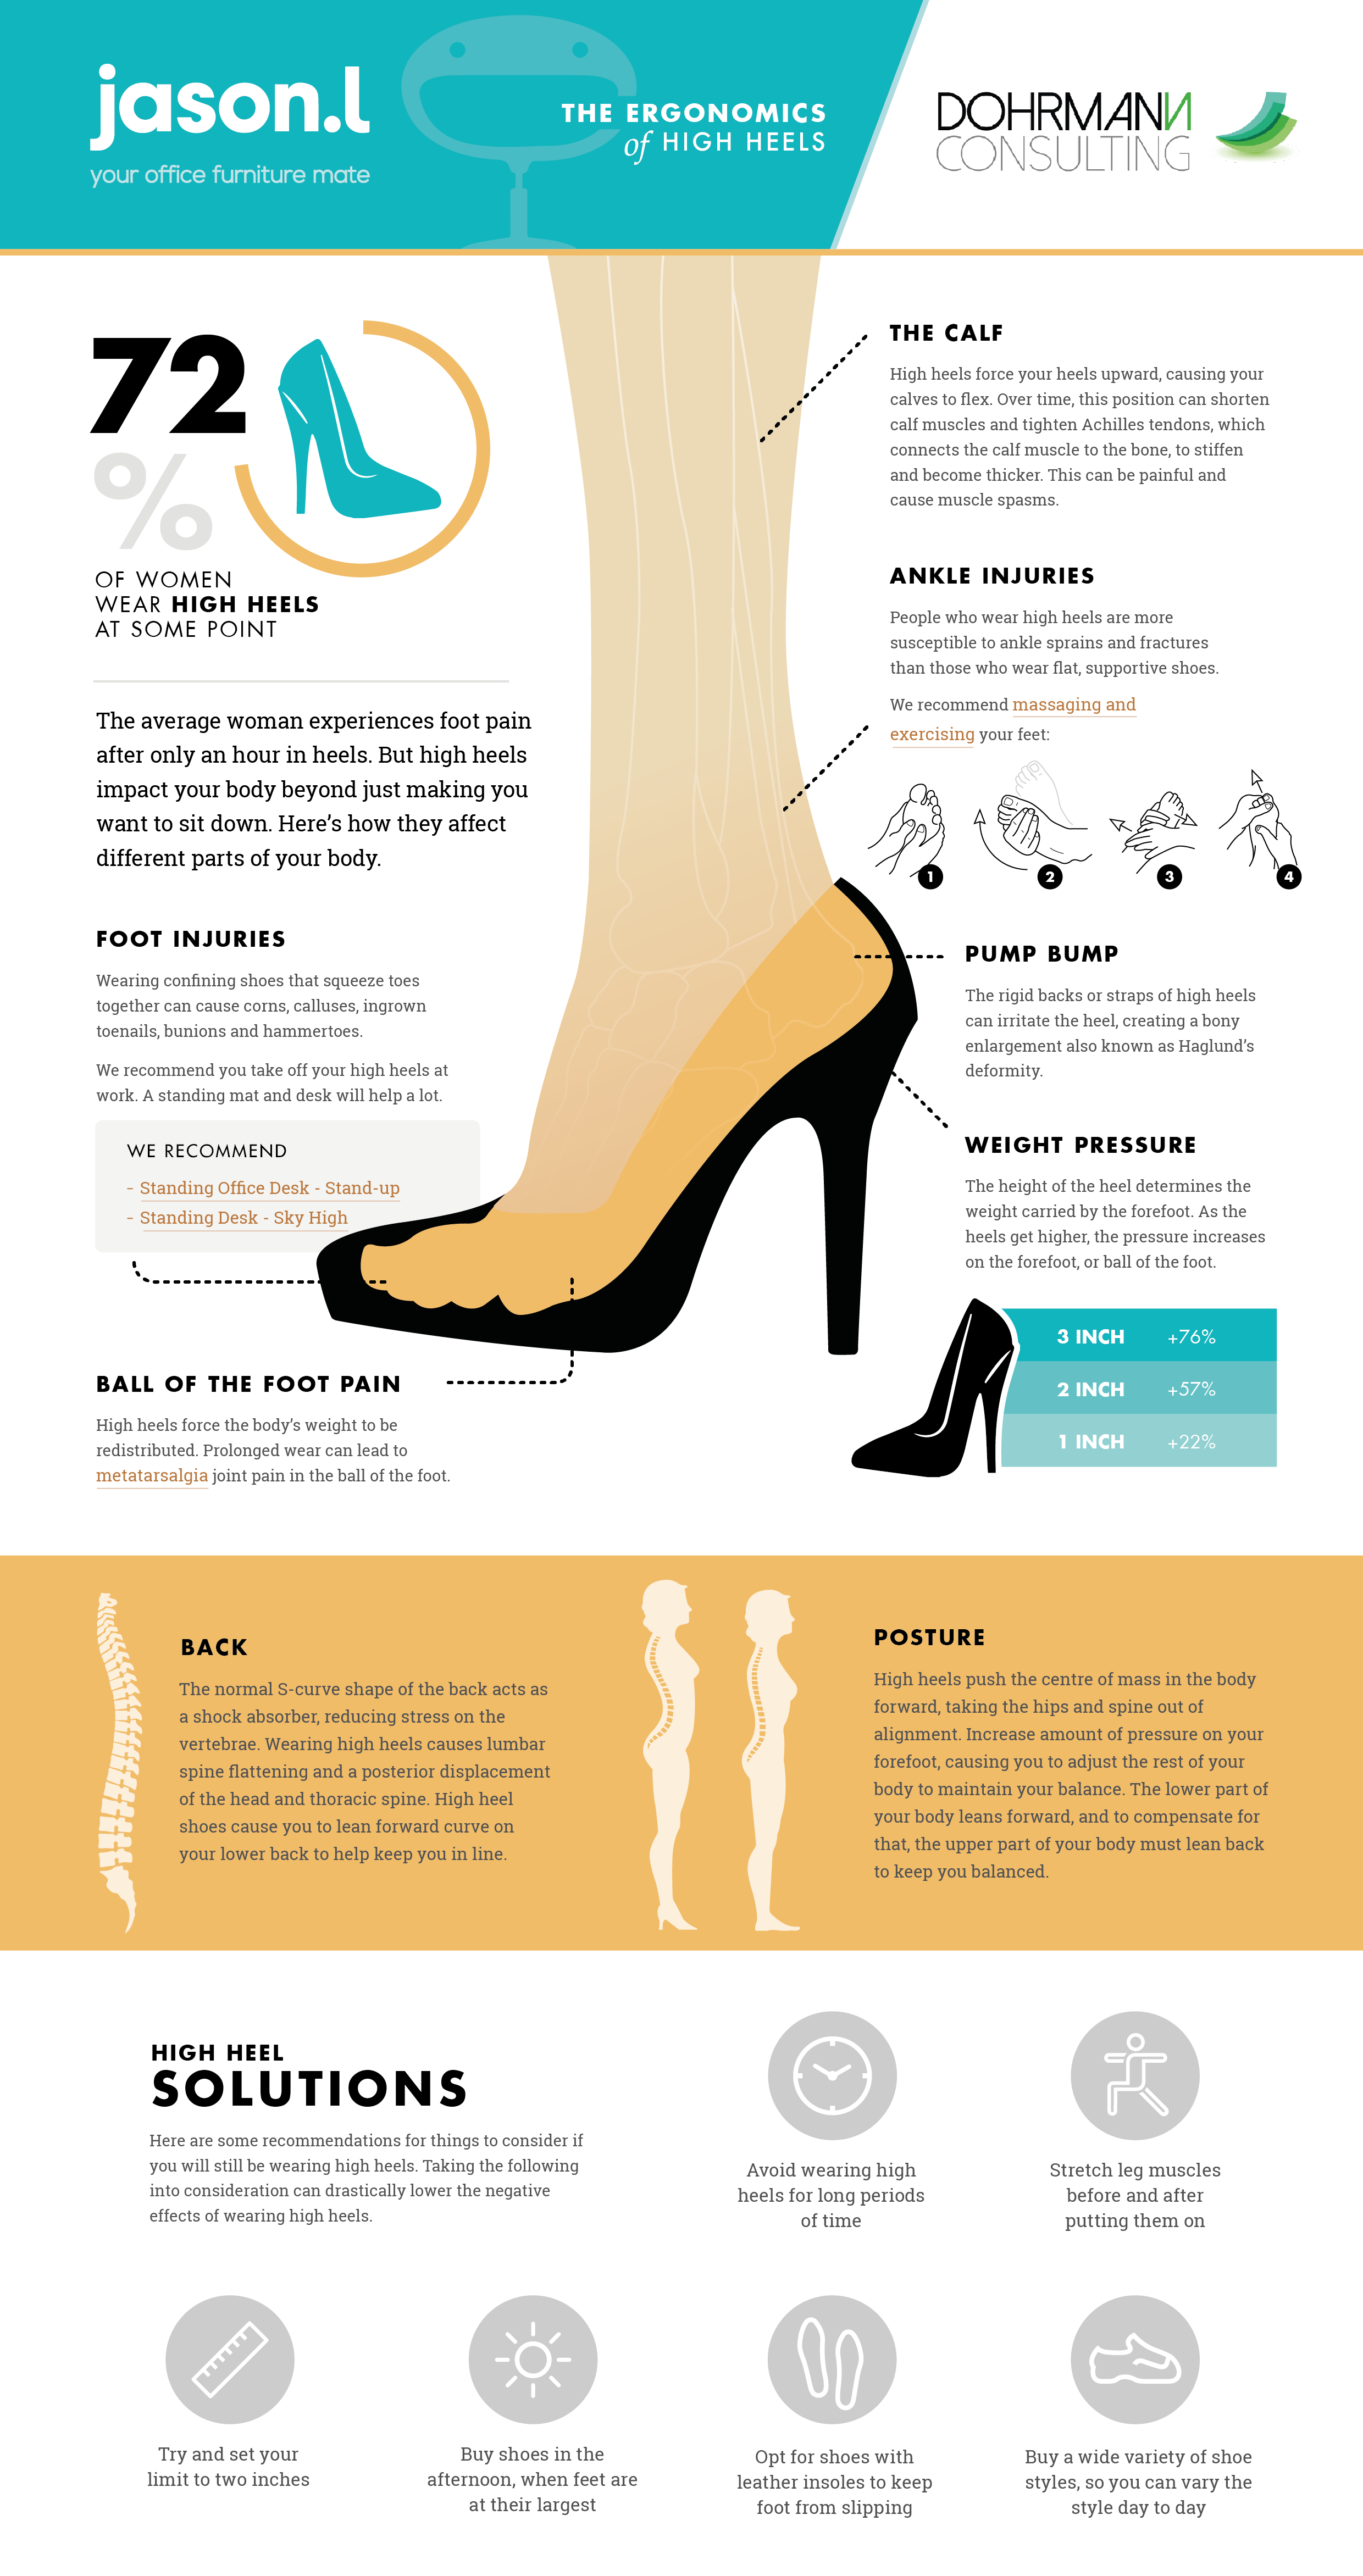 Are high heels bad for your health? Two experts review the evidence